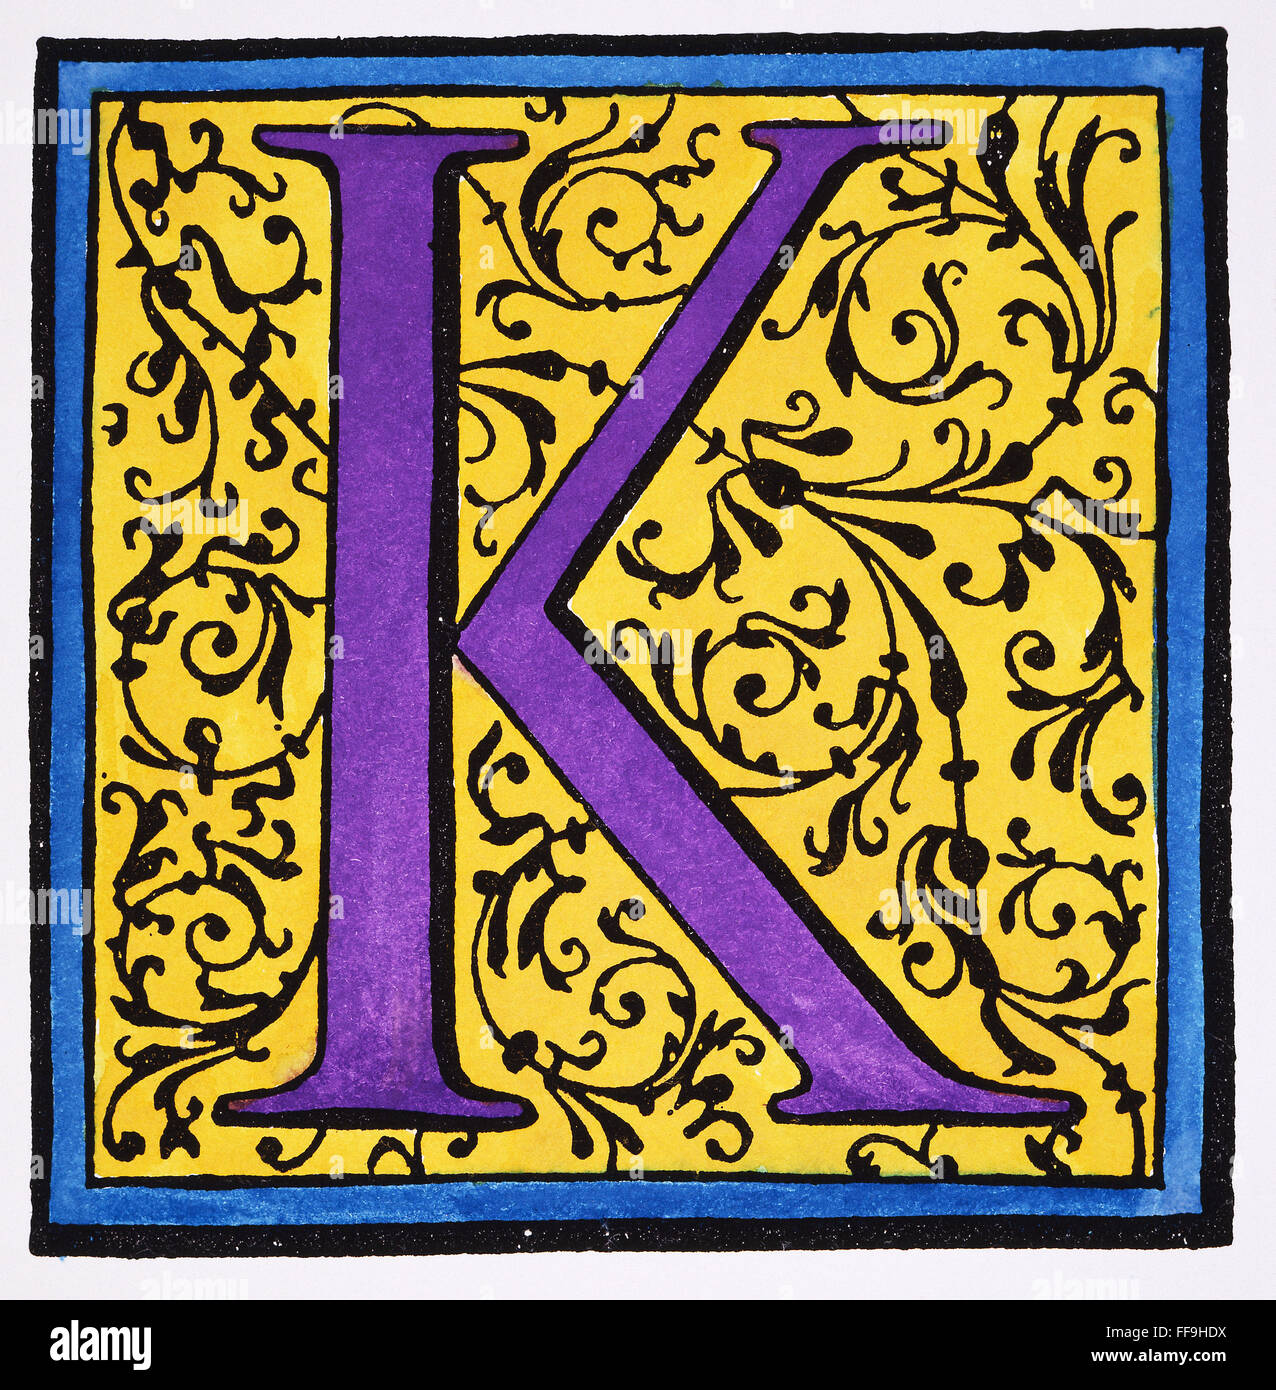 INITIAL 'K', c1600. /nDecorative initial 'K' in a style similar to those initials used by Christophe Plantin and Adam Berg. Woodcut, c1600. Stock Photo